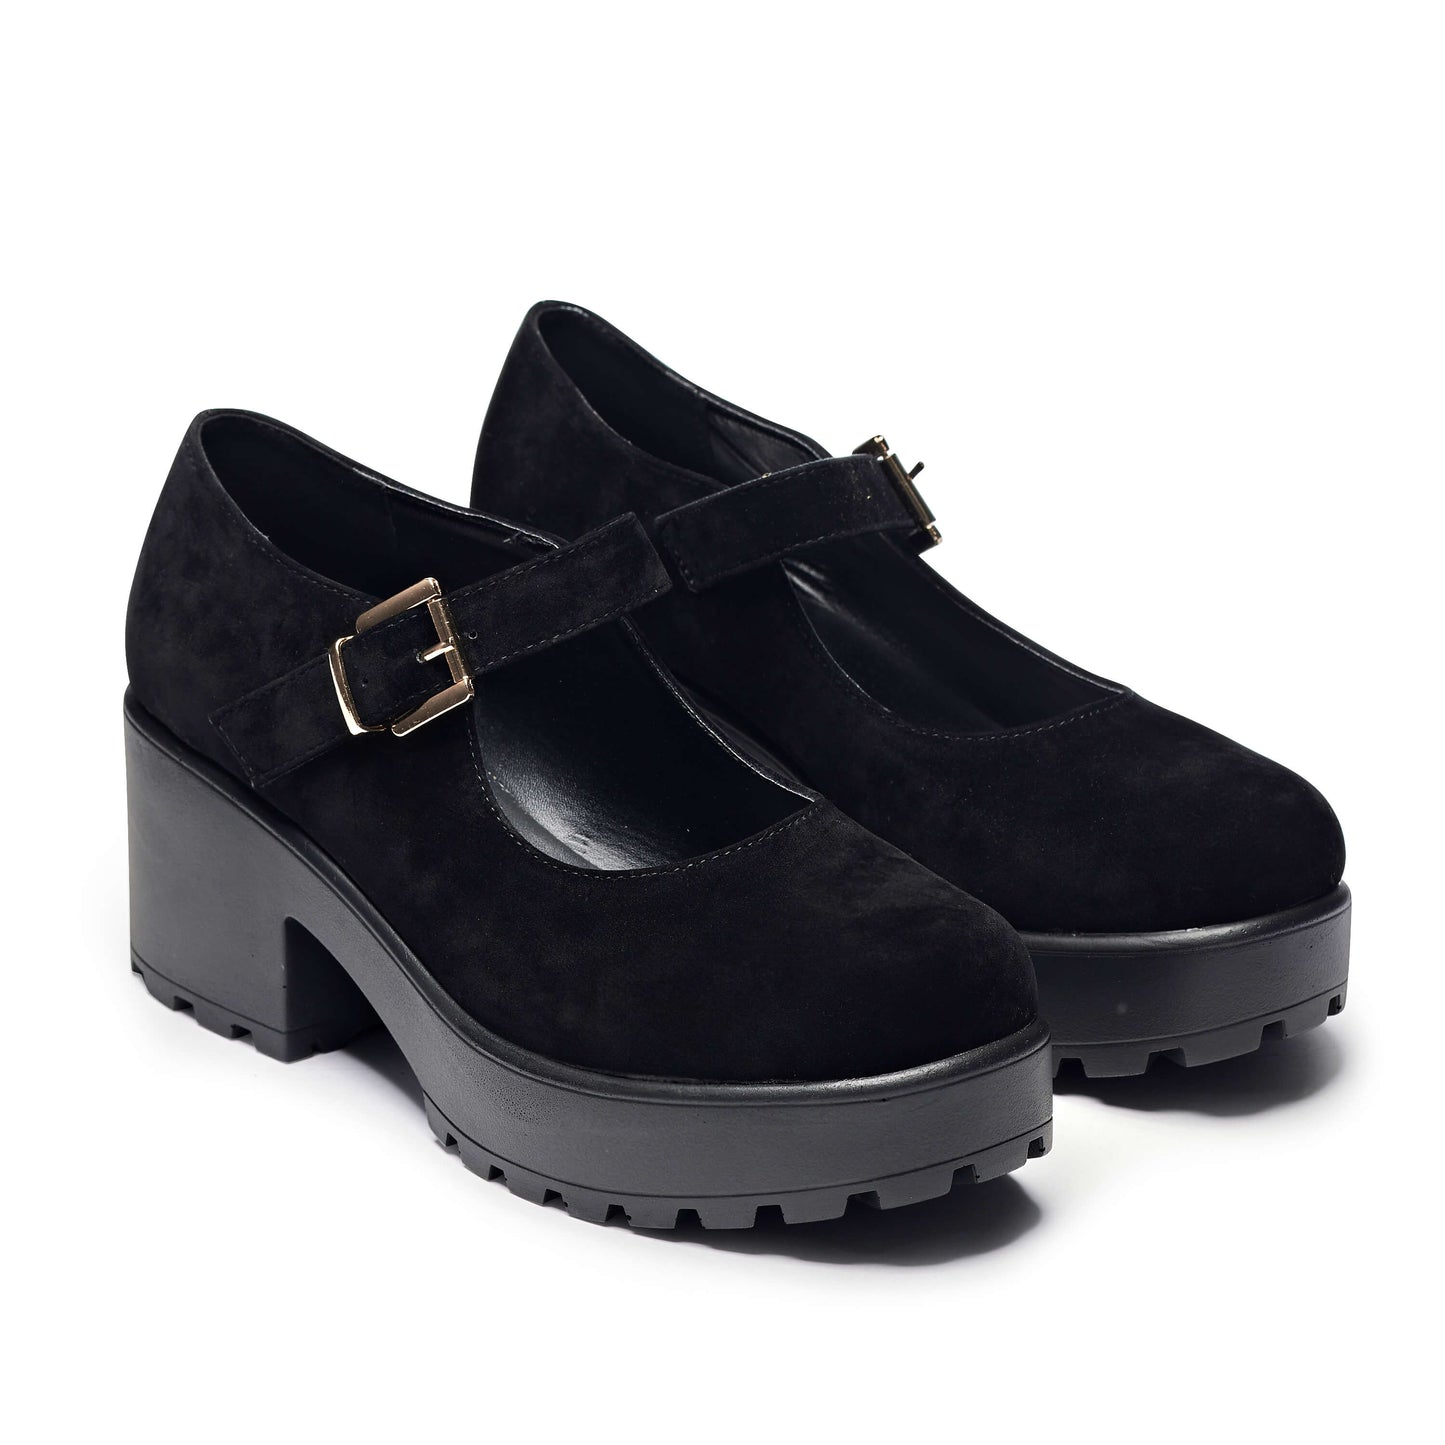 TIRA Black Mary Jane Shoes 'Suede Edition' - Mary Janes - KOI Footwear - Black Suede - Three-Quarter View